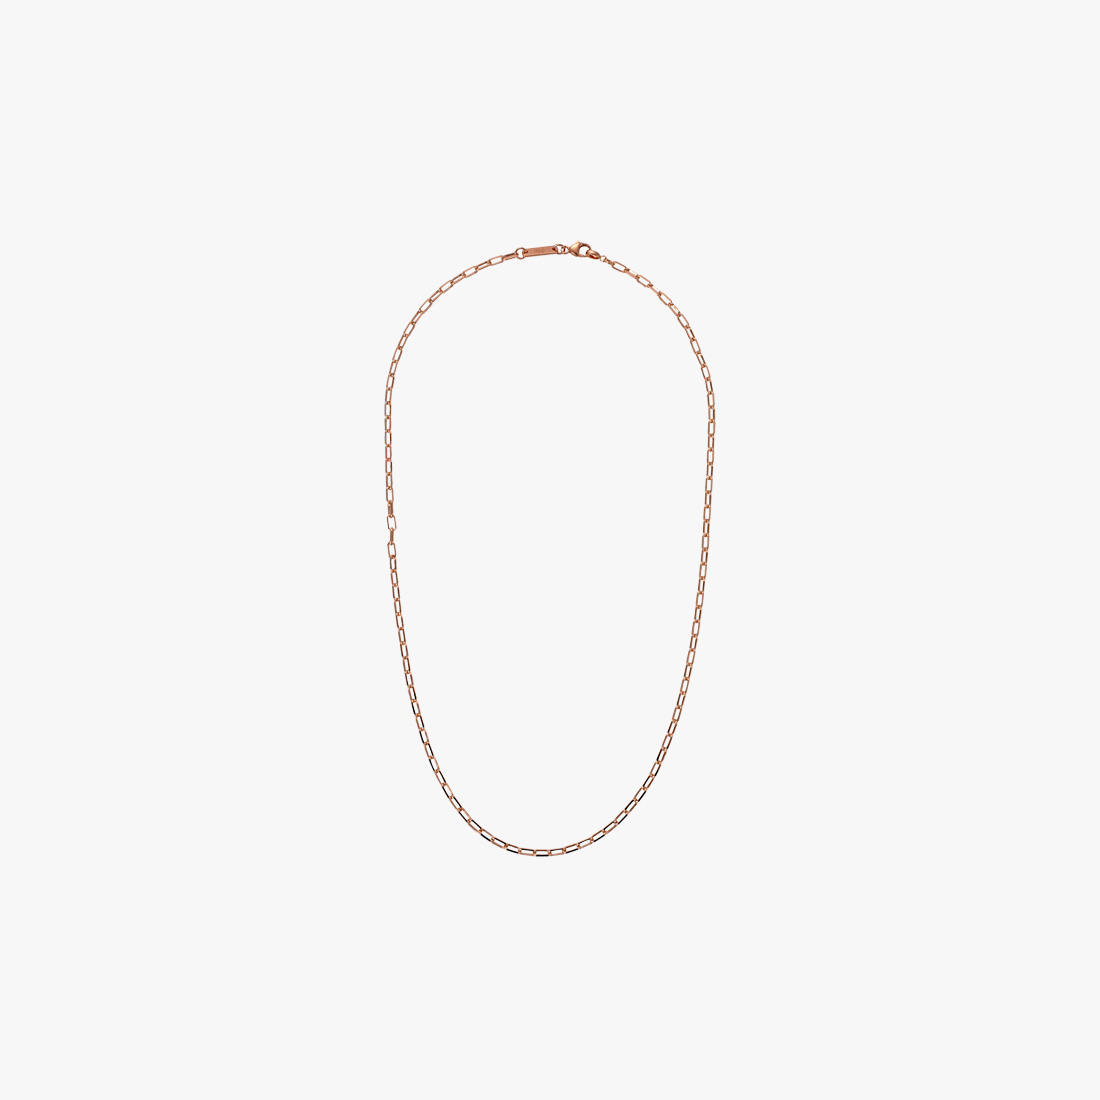 PINK GOLD CHAIN 50cm, , large